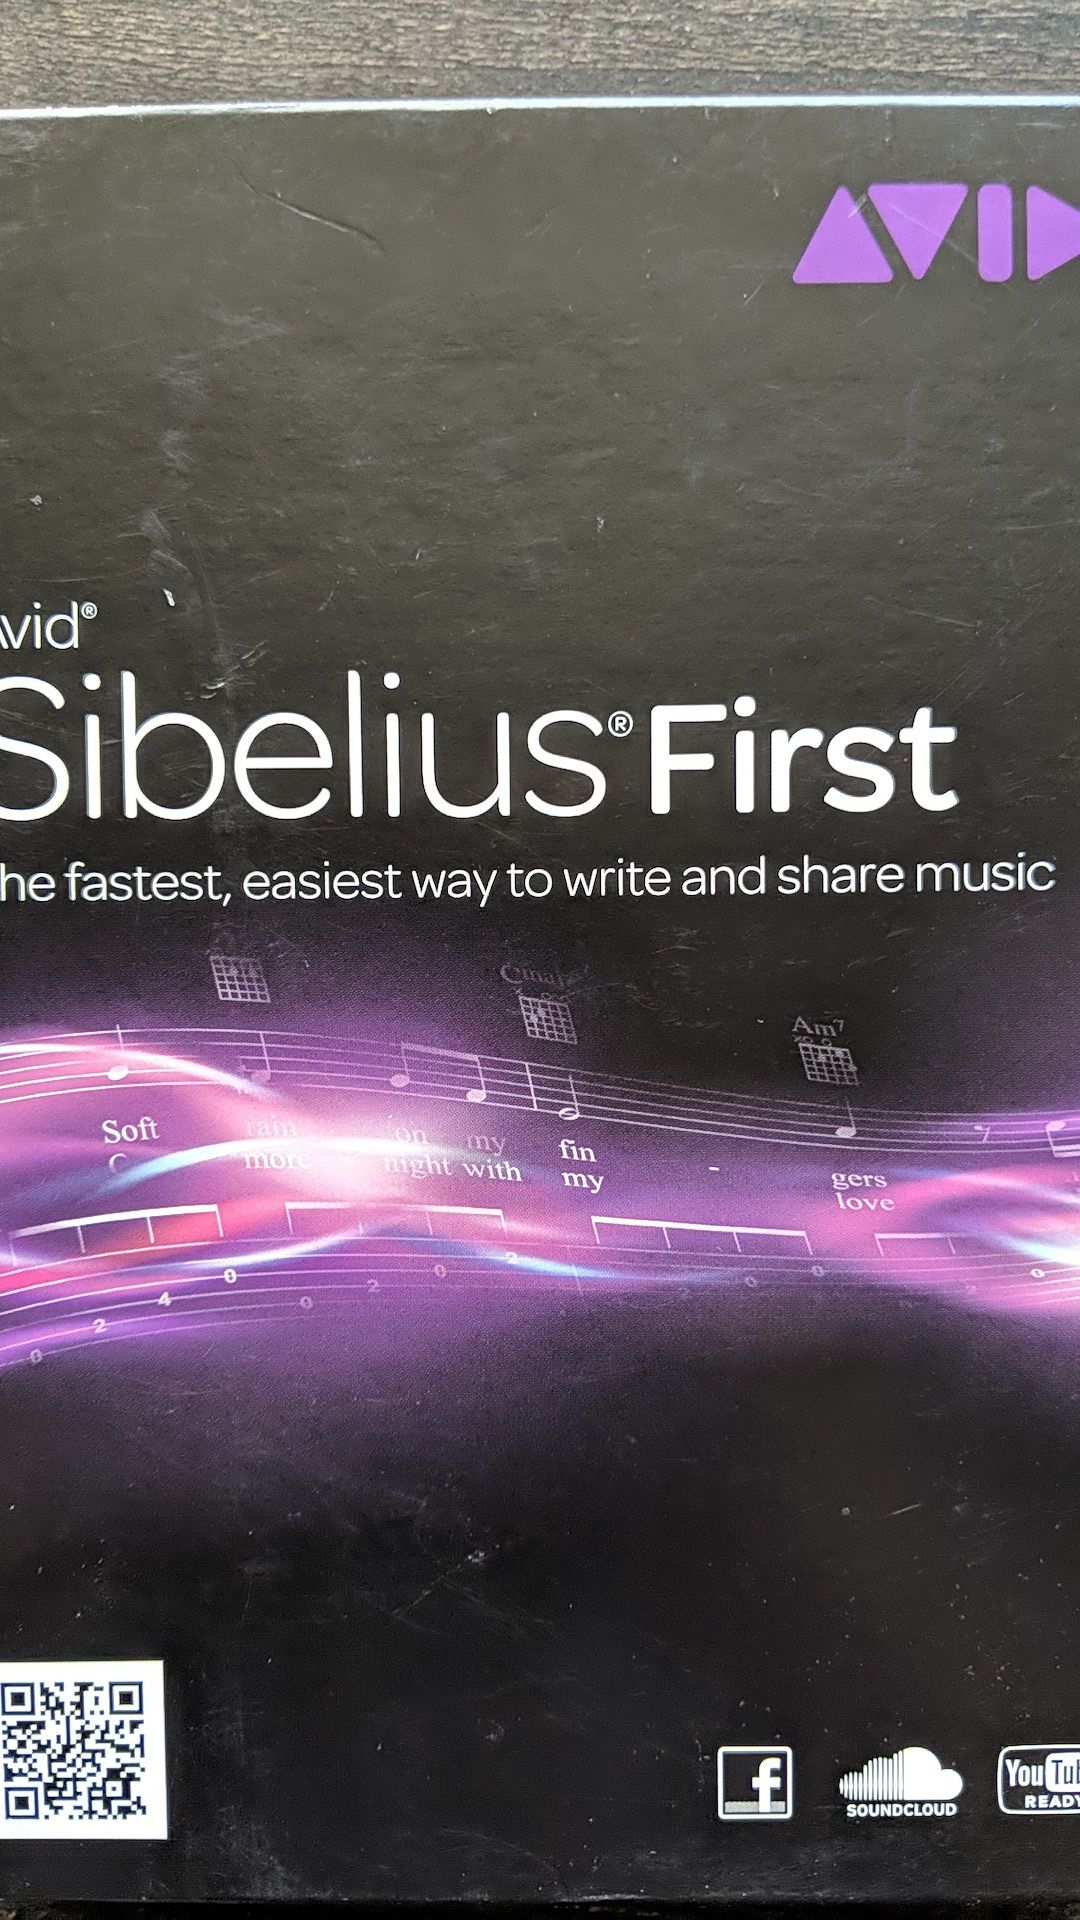 Sibelius - Brand New - professional music composition software